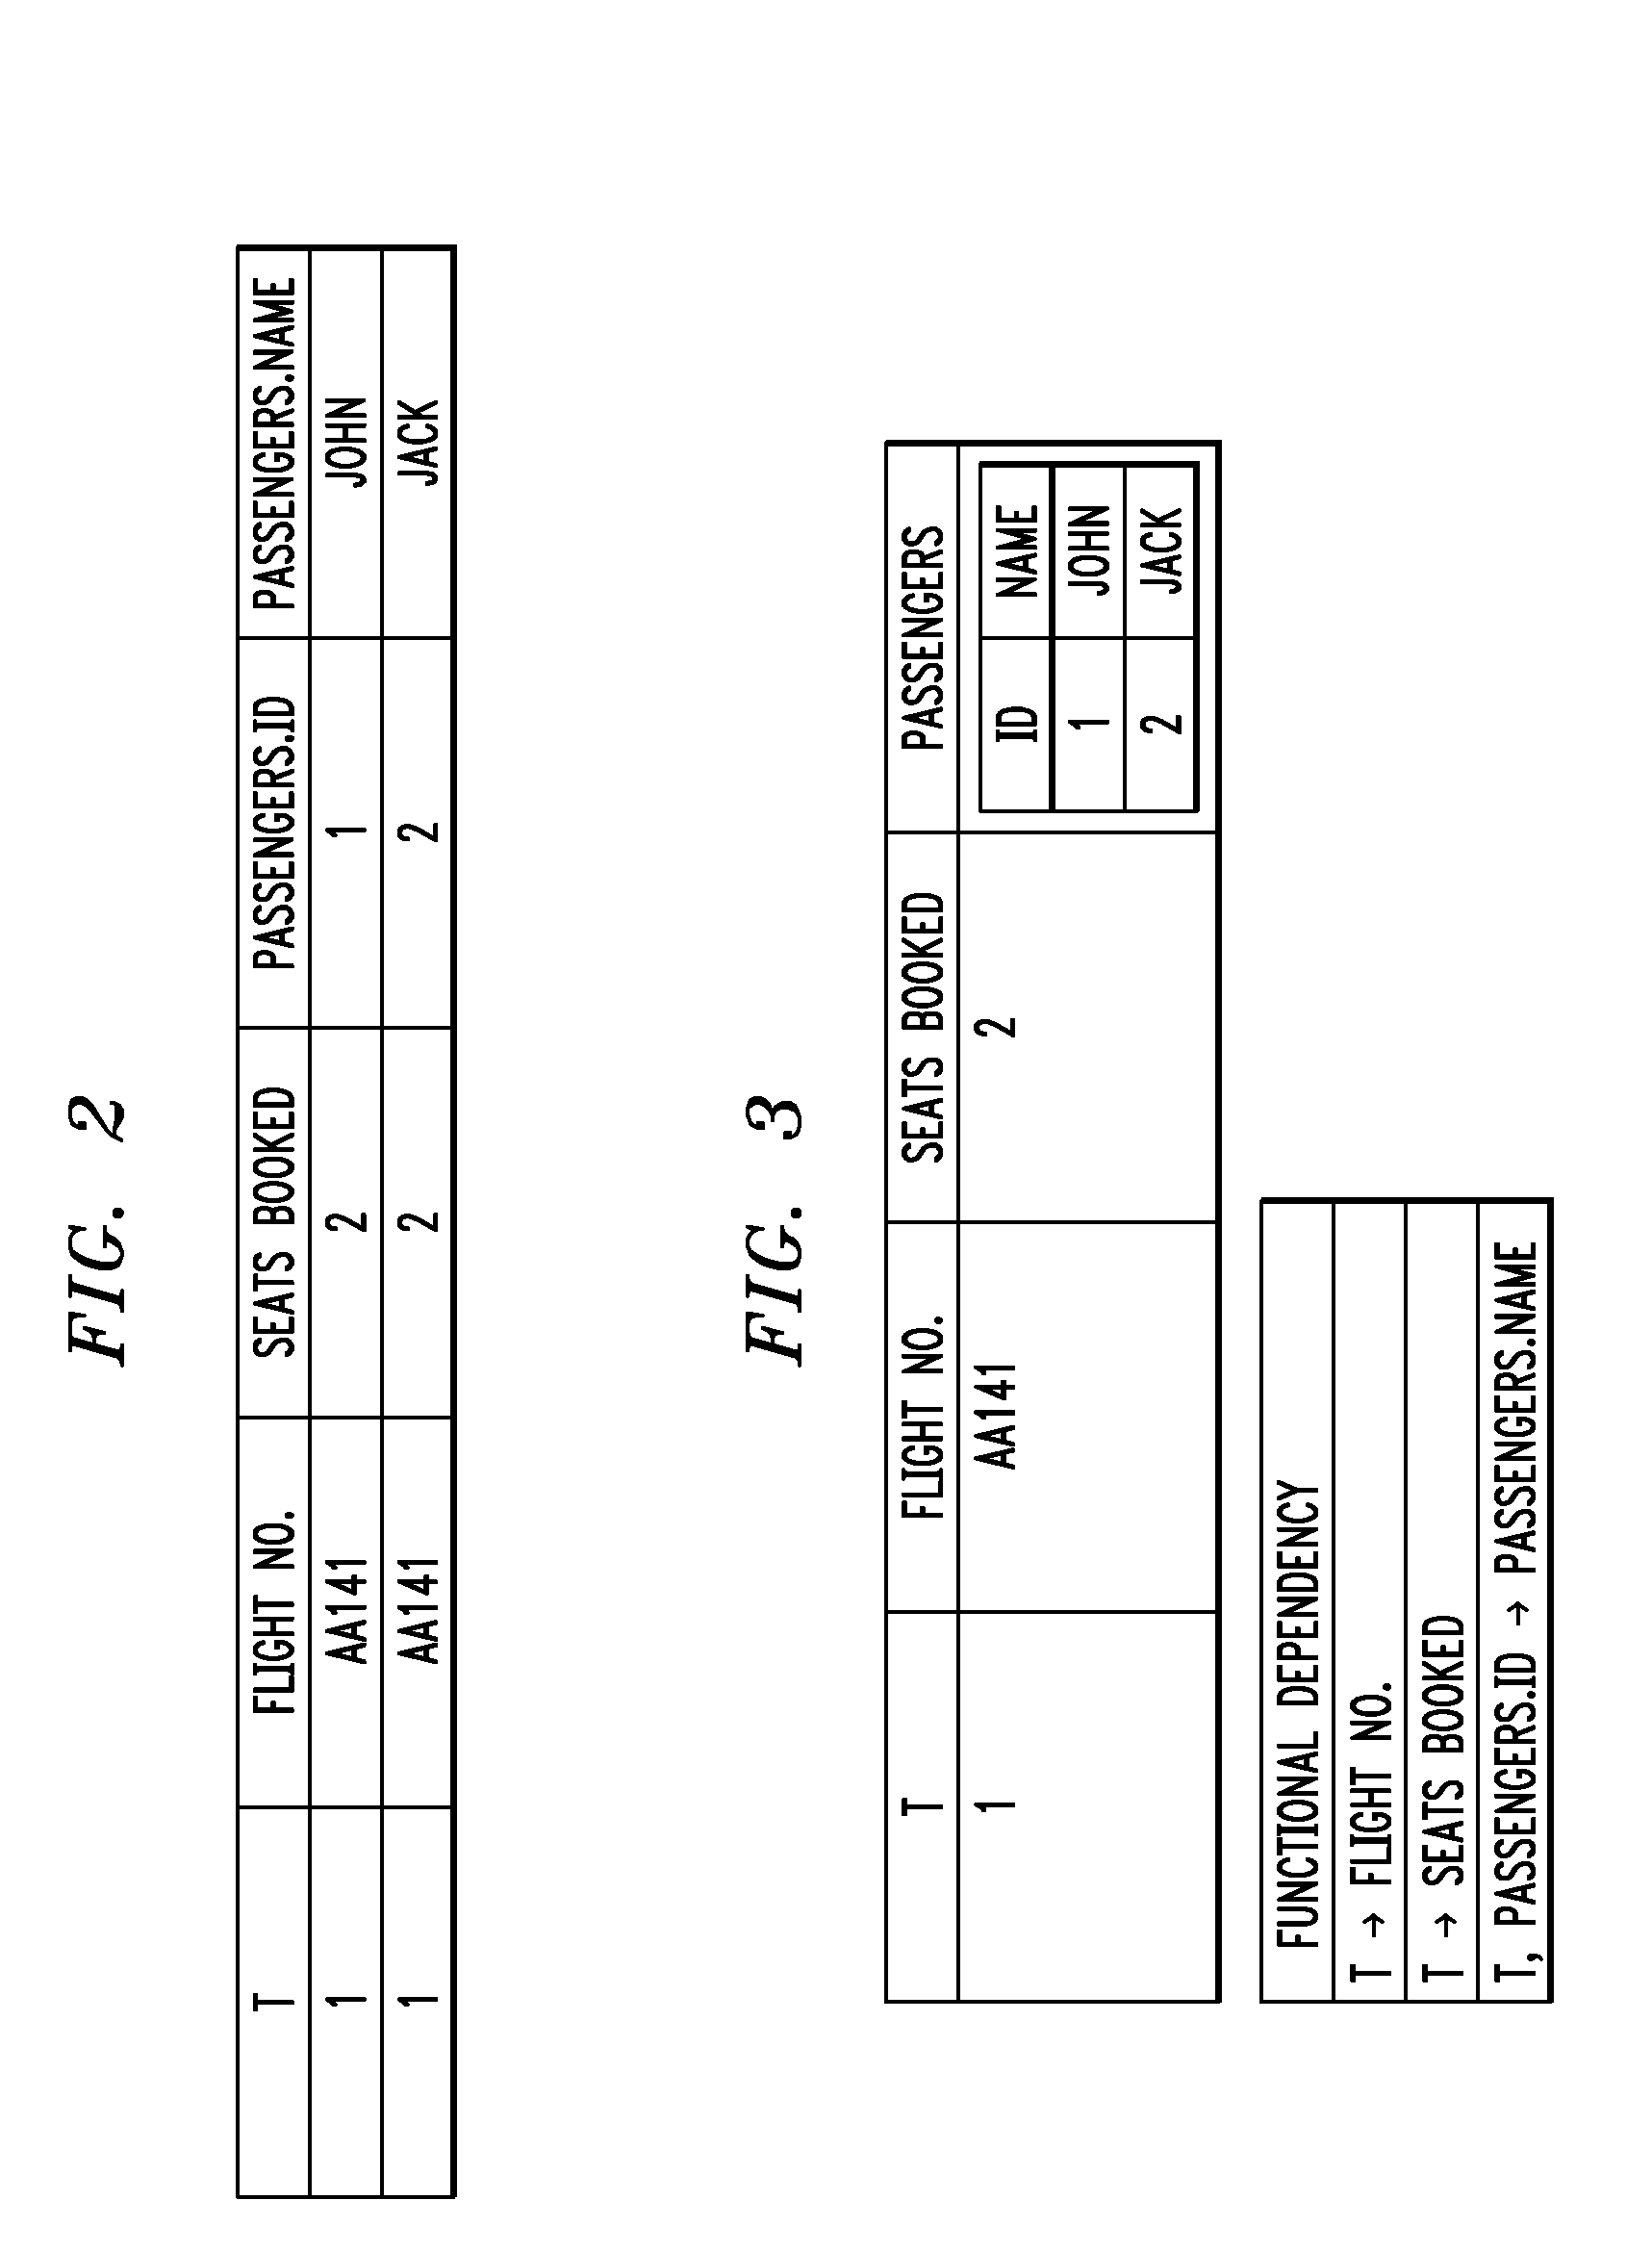 Method and apparatus for integrating relational and hierarchical data